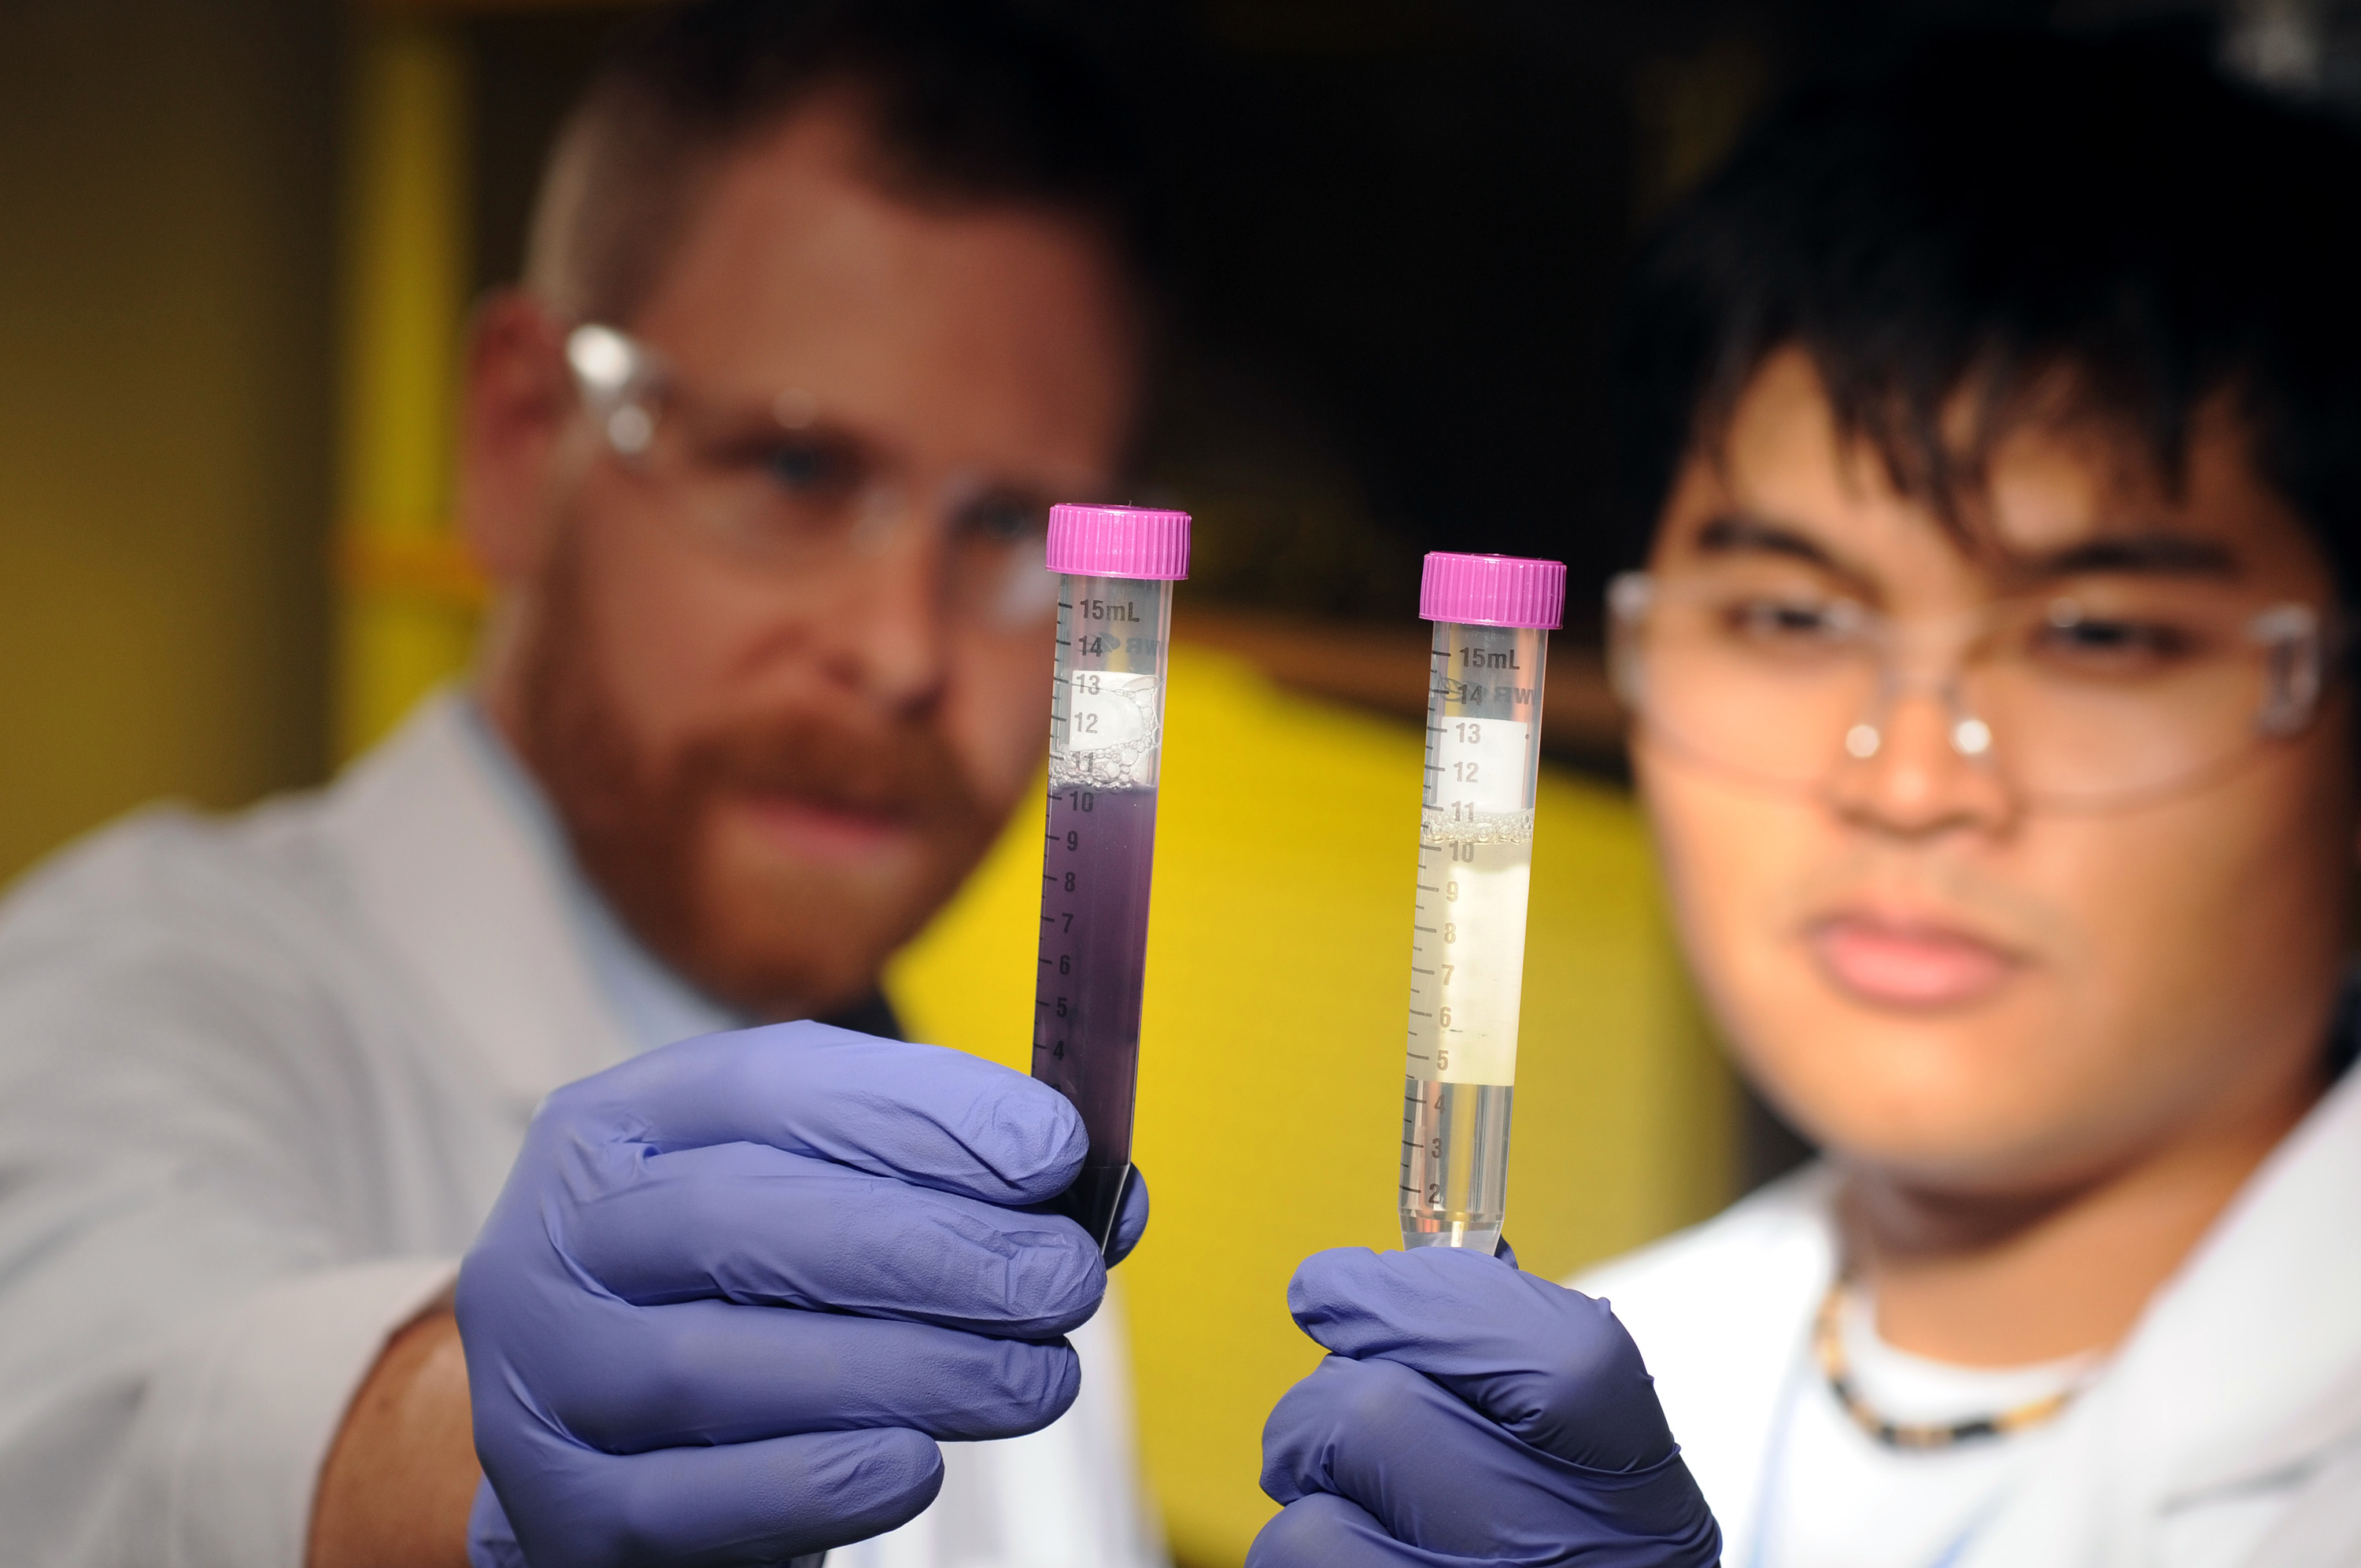 A three-continent research consortium is evaluating a novel environmental crowdsourcing technique that relies on inexpensive tests kits that turn purple in the presence of bacterial contamination. Shown with the test kits are Georgia Tech Assistant Professor Joe Brown (left) and Graduate Research Assistant Andy Loo. (Photo: Gary Meek)